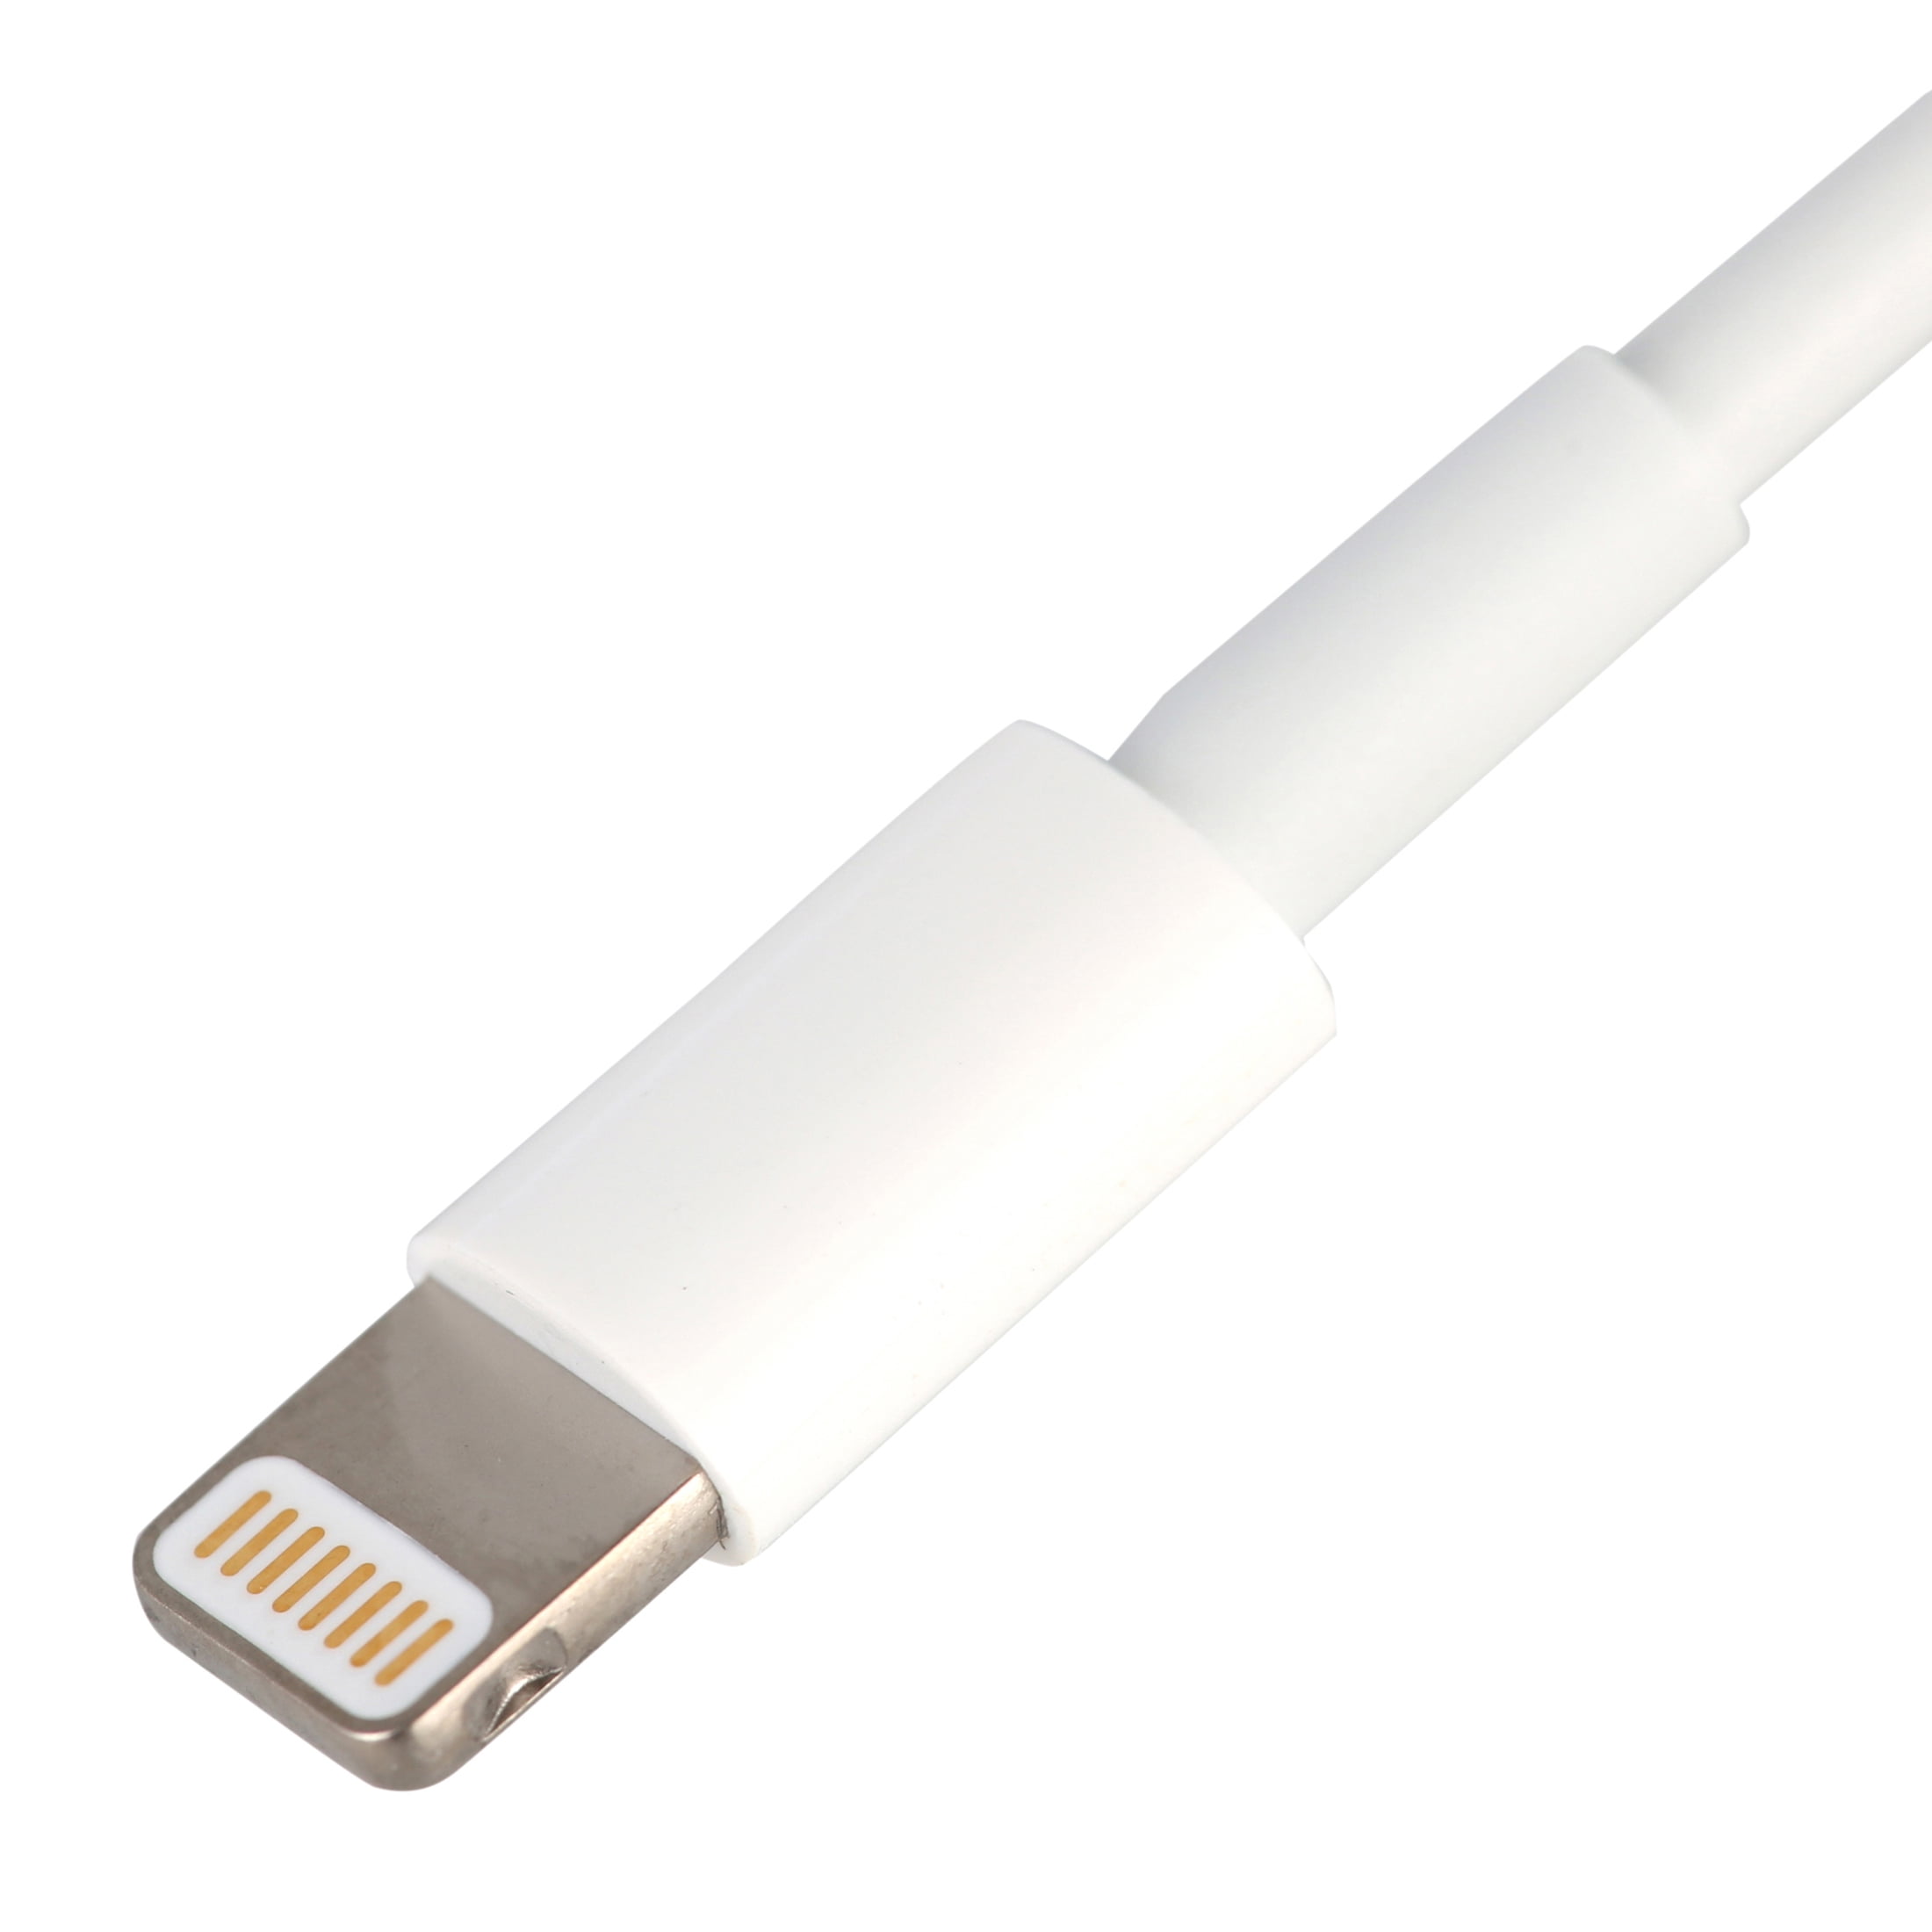 Apple USB Type-A to Lightning Cable (1.6') ME291AM/A B&H Photo